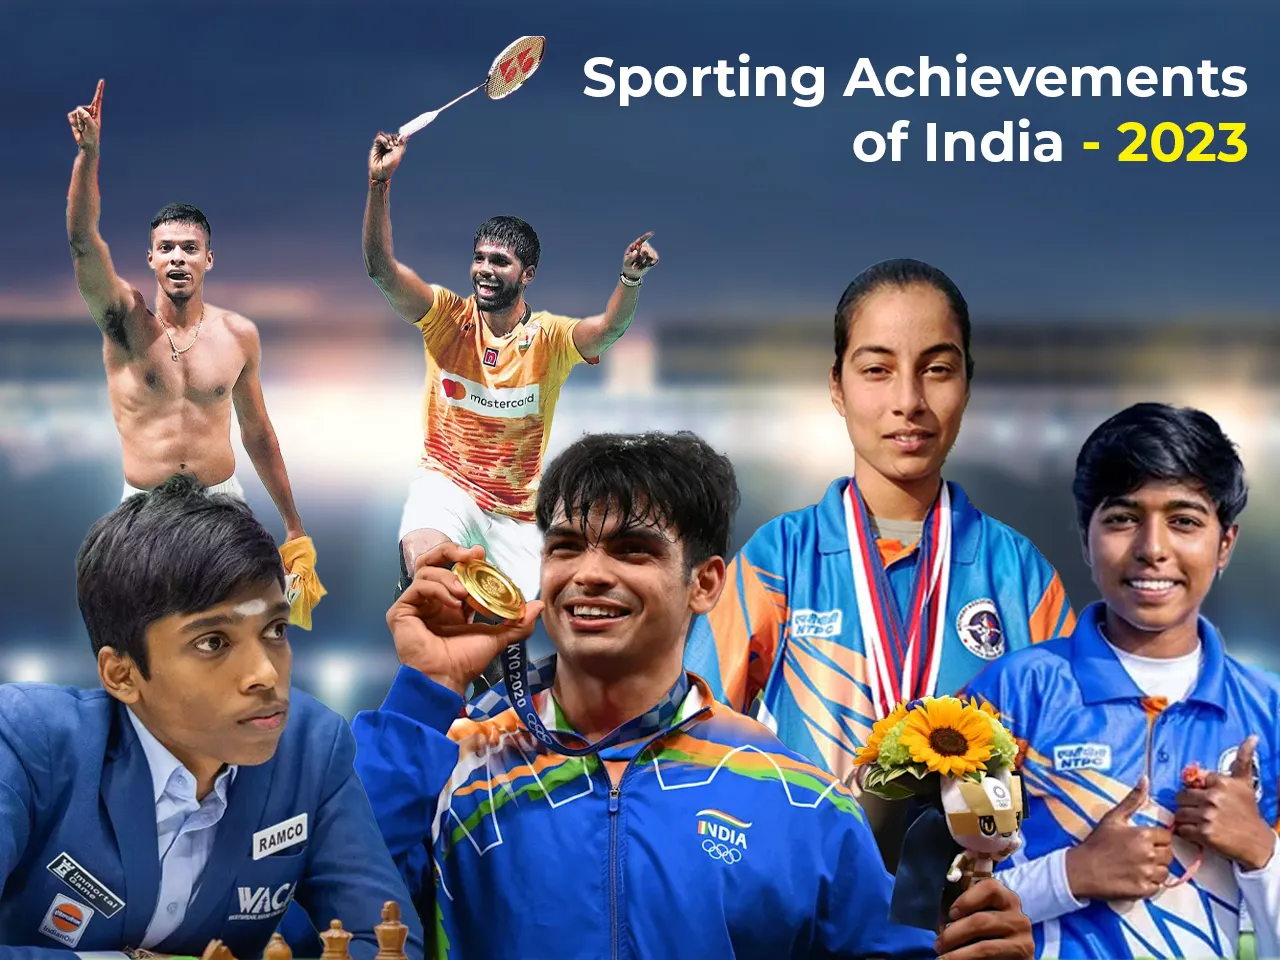 Sporting achievements of India in 2023